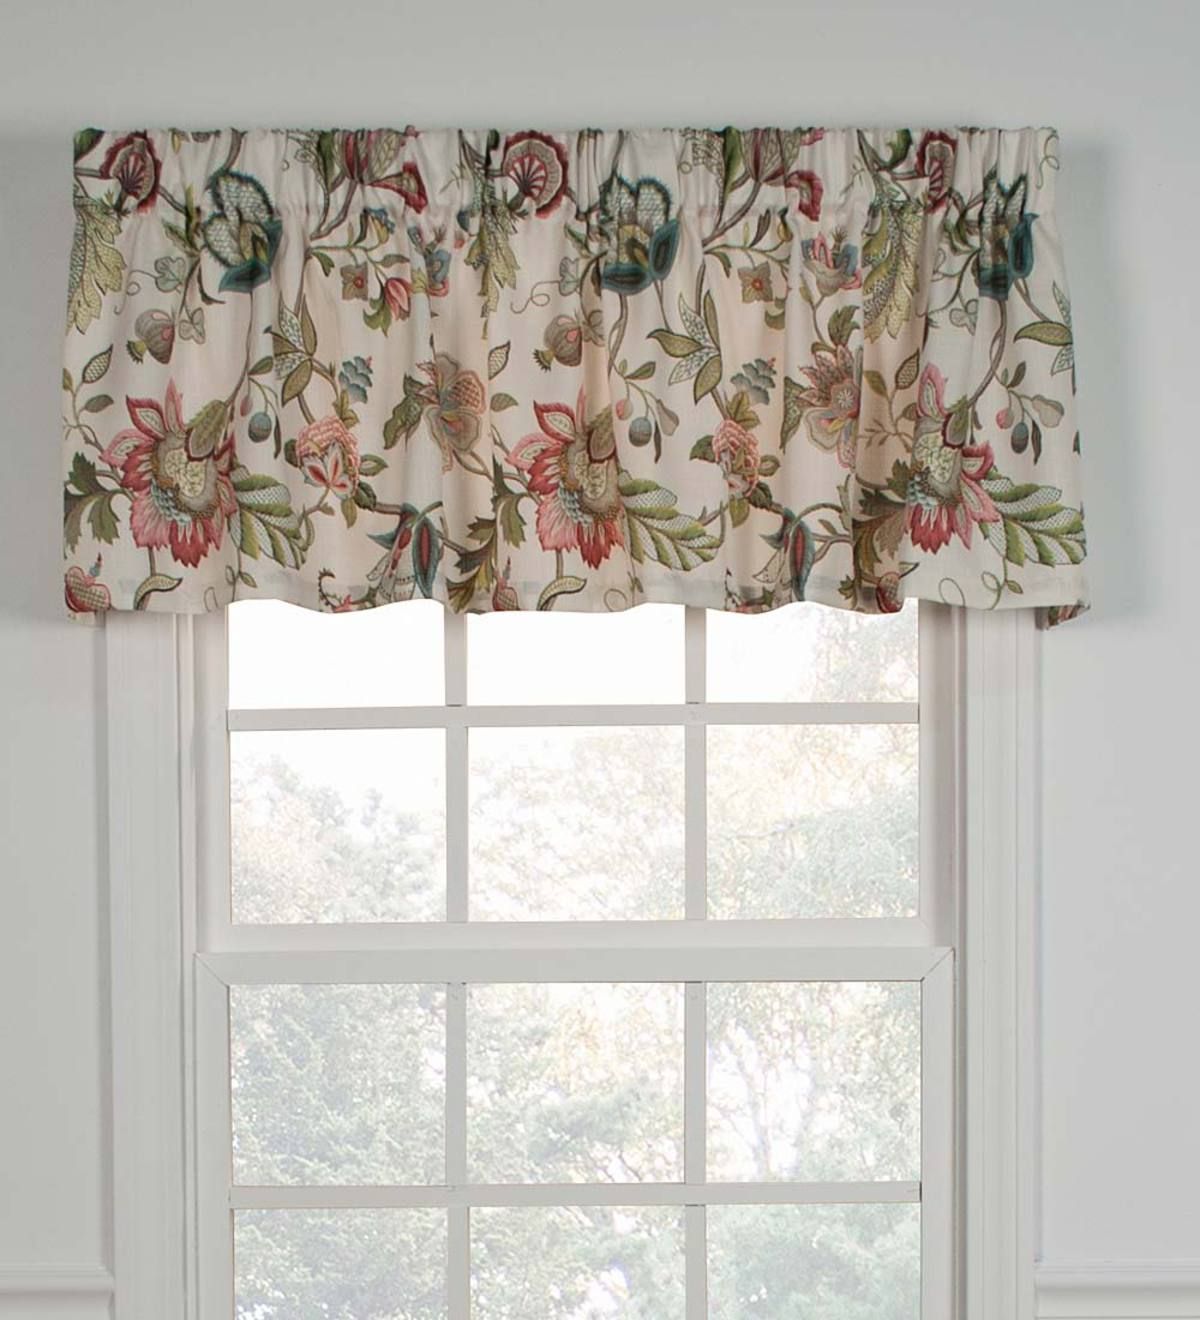 Floral Pattern Window Valances Within Most Recently Released Brissac Jacobean Floral Print Window Valances (View 4 of 20)